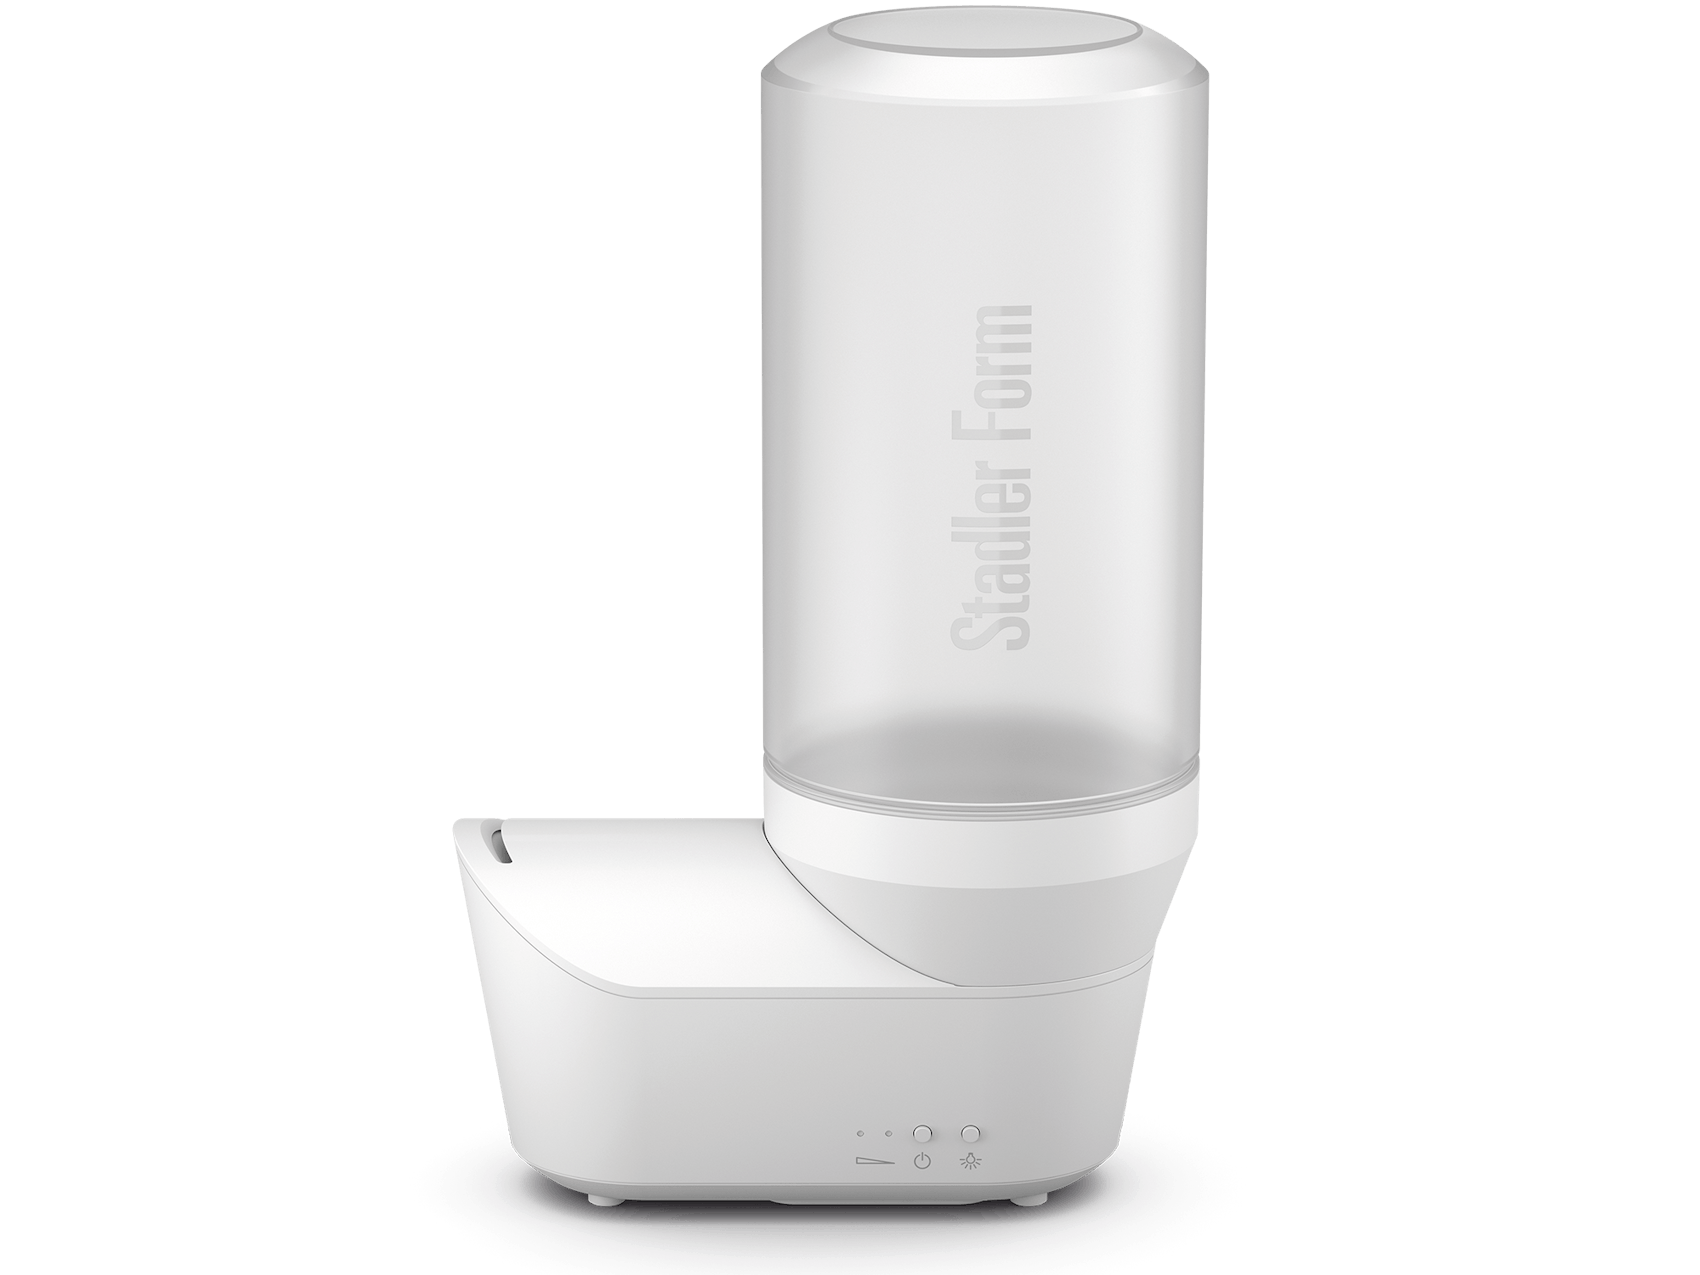 Emma personal humidifier by Stadler Form in white as front view